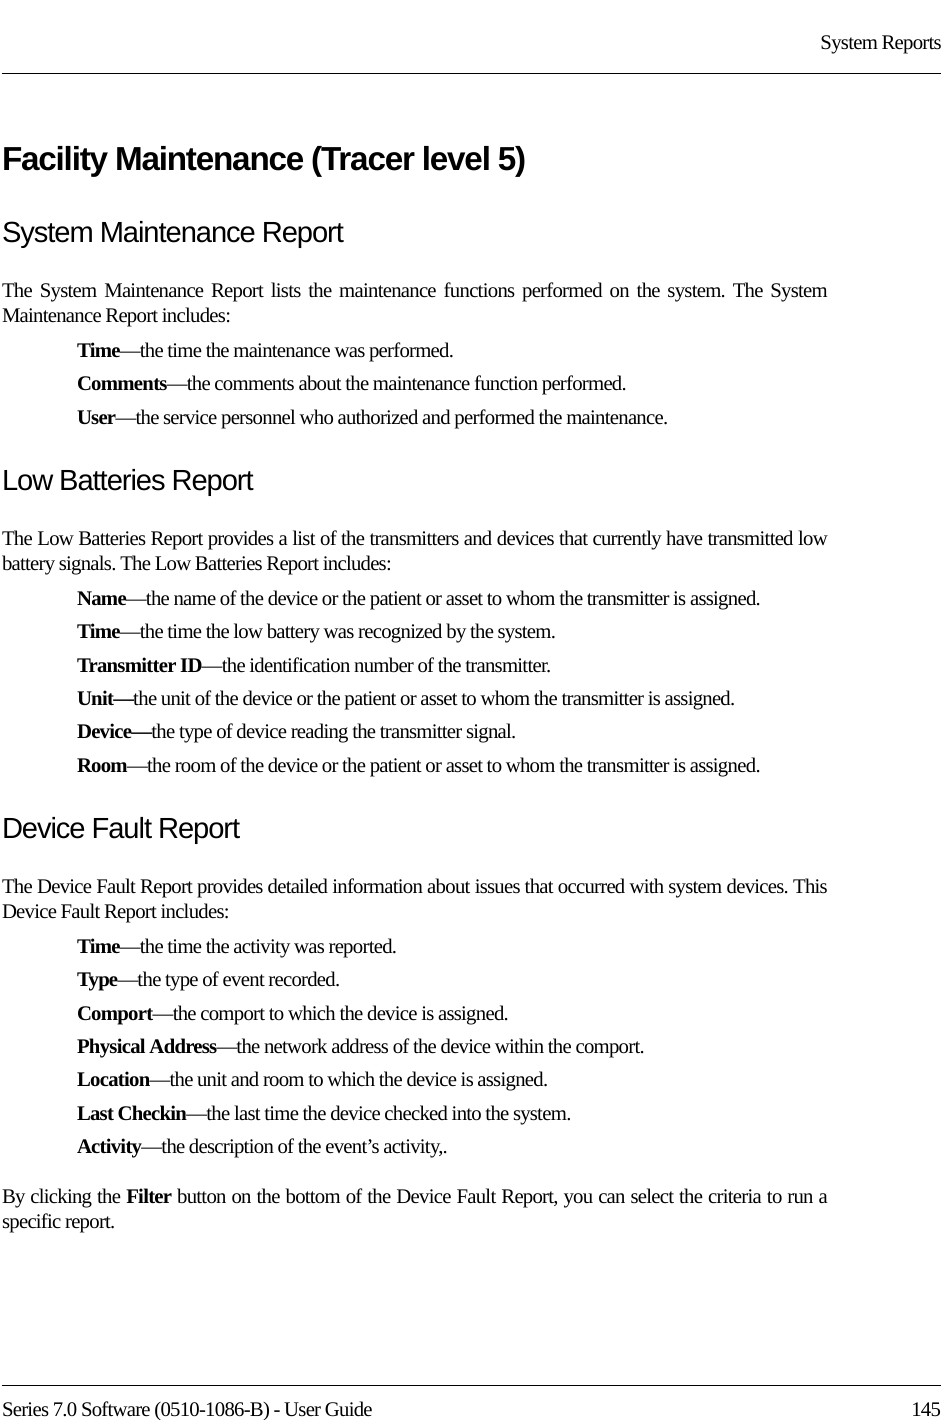 Series 7.0 Software (0510-1086-B) - User Guide  145System ReportsFacility Maintenance (Tracer level 5)System Maintenance ReportThe System Maintenance Report lists the maintenance functions performed on the system. The System Maintenance Report includes:Time—the time the maintenance was performed.Comments—the comments about the maintenance function performed.User—the service personnel who authorized and performed the maintenance.Low Batteries ReportThe Low Batteries Report provides a list of the transmitters and devices that currently have transmitted low battery signals. The Low Batteries Report includes:Name—the name of the device or the patient or asset to whom the transmitter is assigned. Time—the time the low battery was recognized by the system.Transmitter ID—the identification number of the transmitter.Unit—the unit of the device or the patient or asset to whom the transmitter is assigned.Device—the type of device reading the transmitter signal.Room—the room of the device or the patient or asset to whom the transmitter is assigned.Device Fault ReportThe Device Fault Report provides detailed information about issues that occurred with system devices. This Device Fault Report includes:Time—the time the activity was reported.Type—the type of event recorded.Comport—the comport to which the device is assigned.Physical Address—the network address of the device within the comport.Location—the unit and room to which the device is assigned.Last Checkin—the last time the device checked into the system.Activity—the description of the event’s activity,.By clicking the Filter button on the bottom of the Device Fault Report, you can select the criteria to run a specific report. 